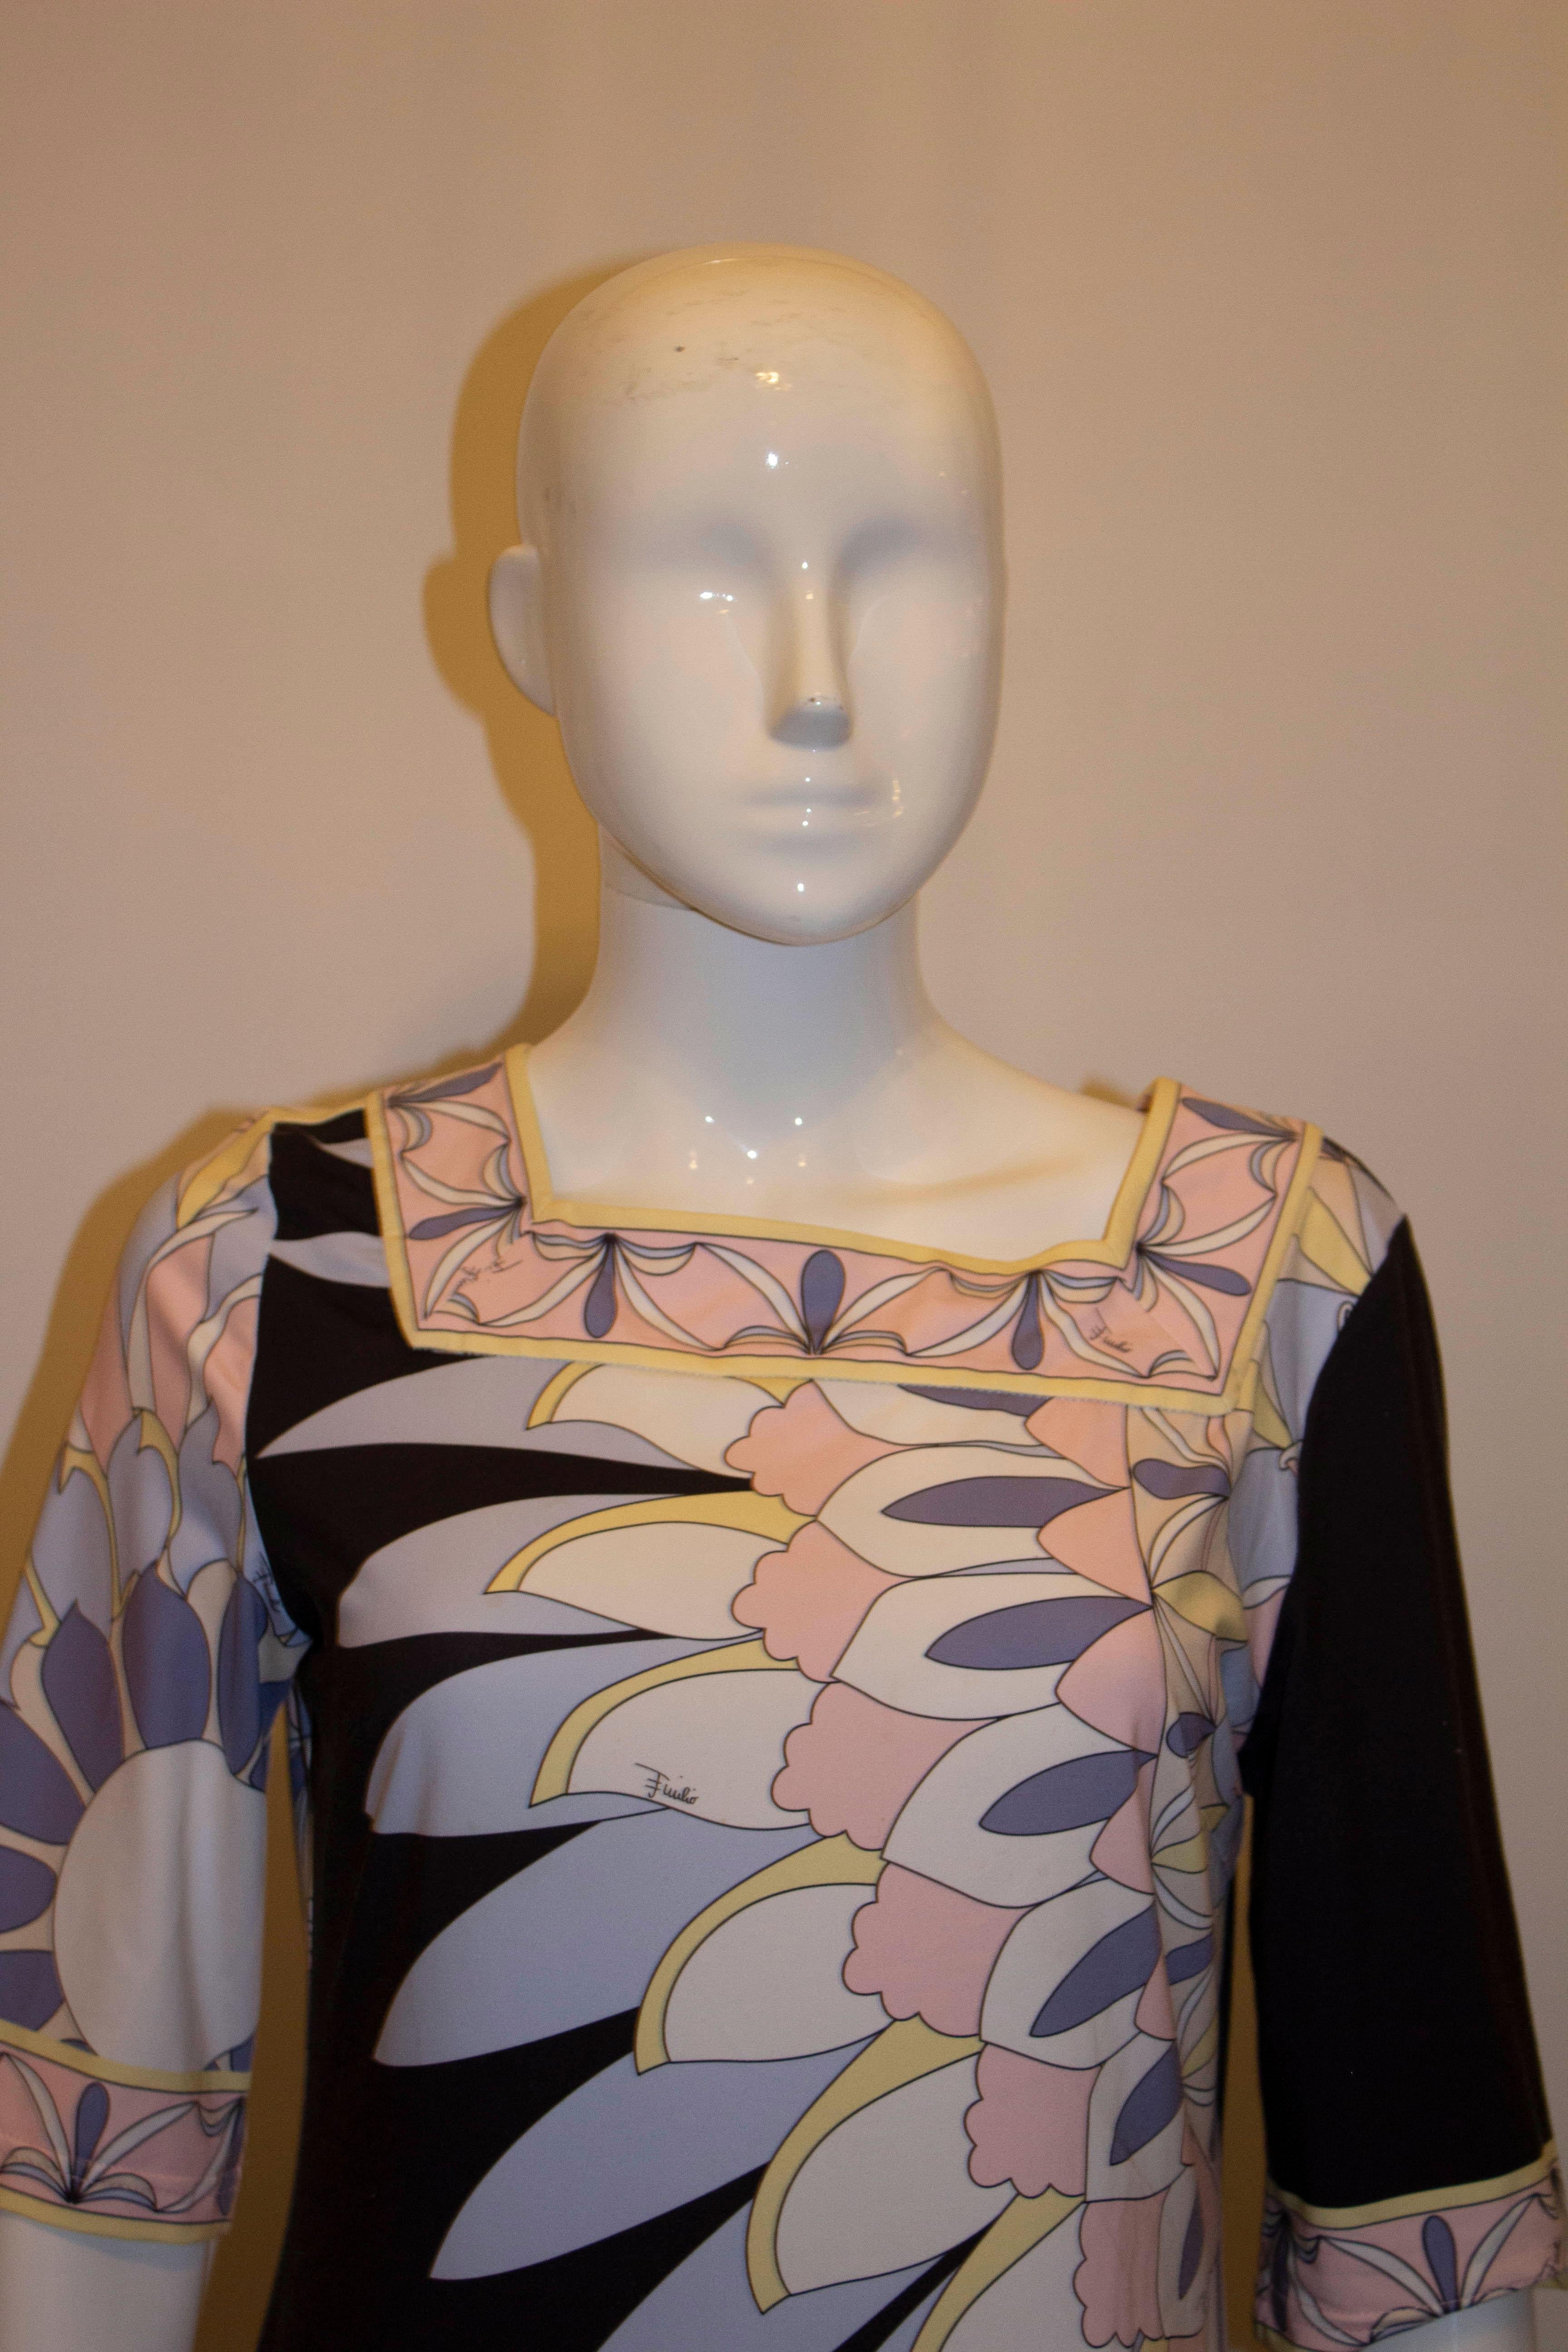 Women's Pucci Silk Jersey Dress in Ice Cream Colours and Black Background For Sale